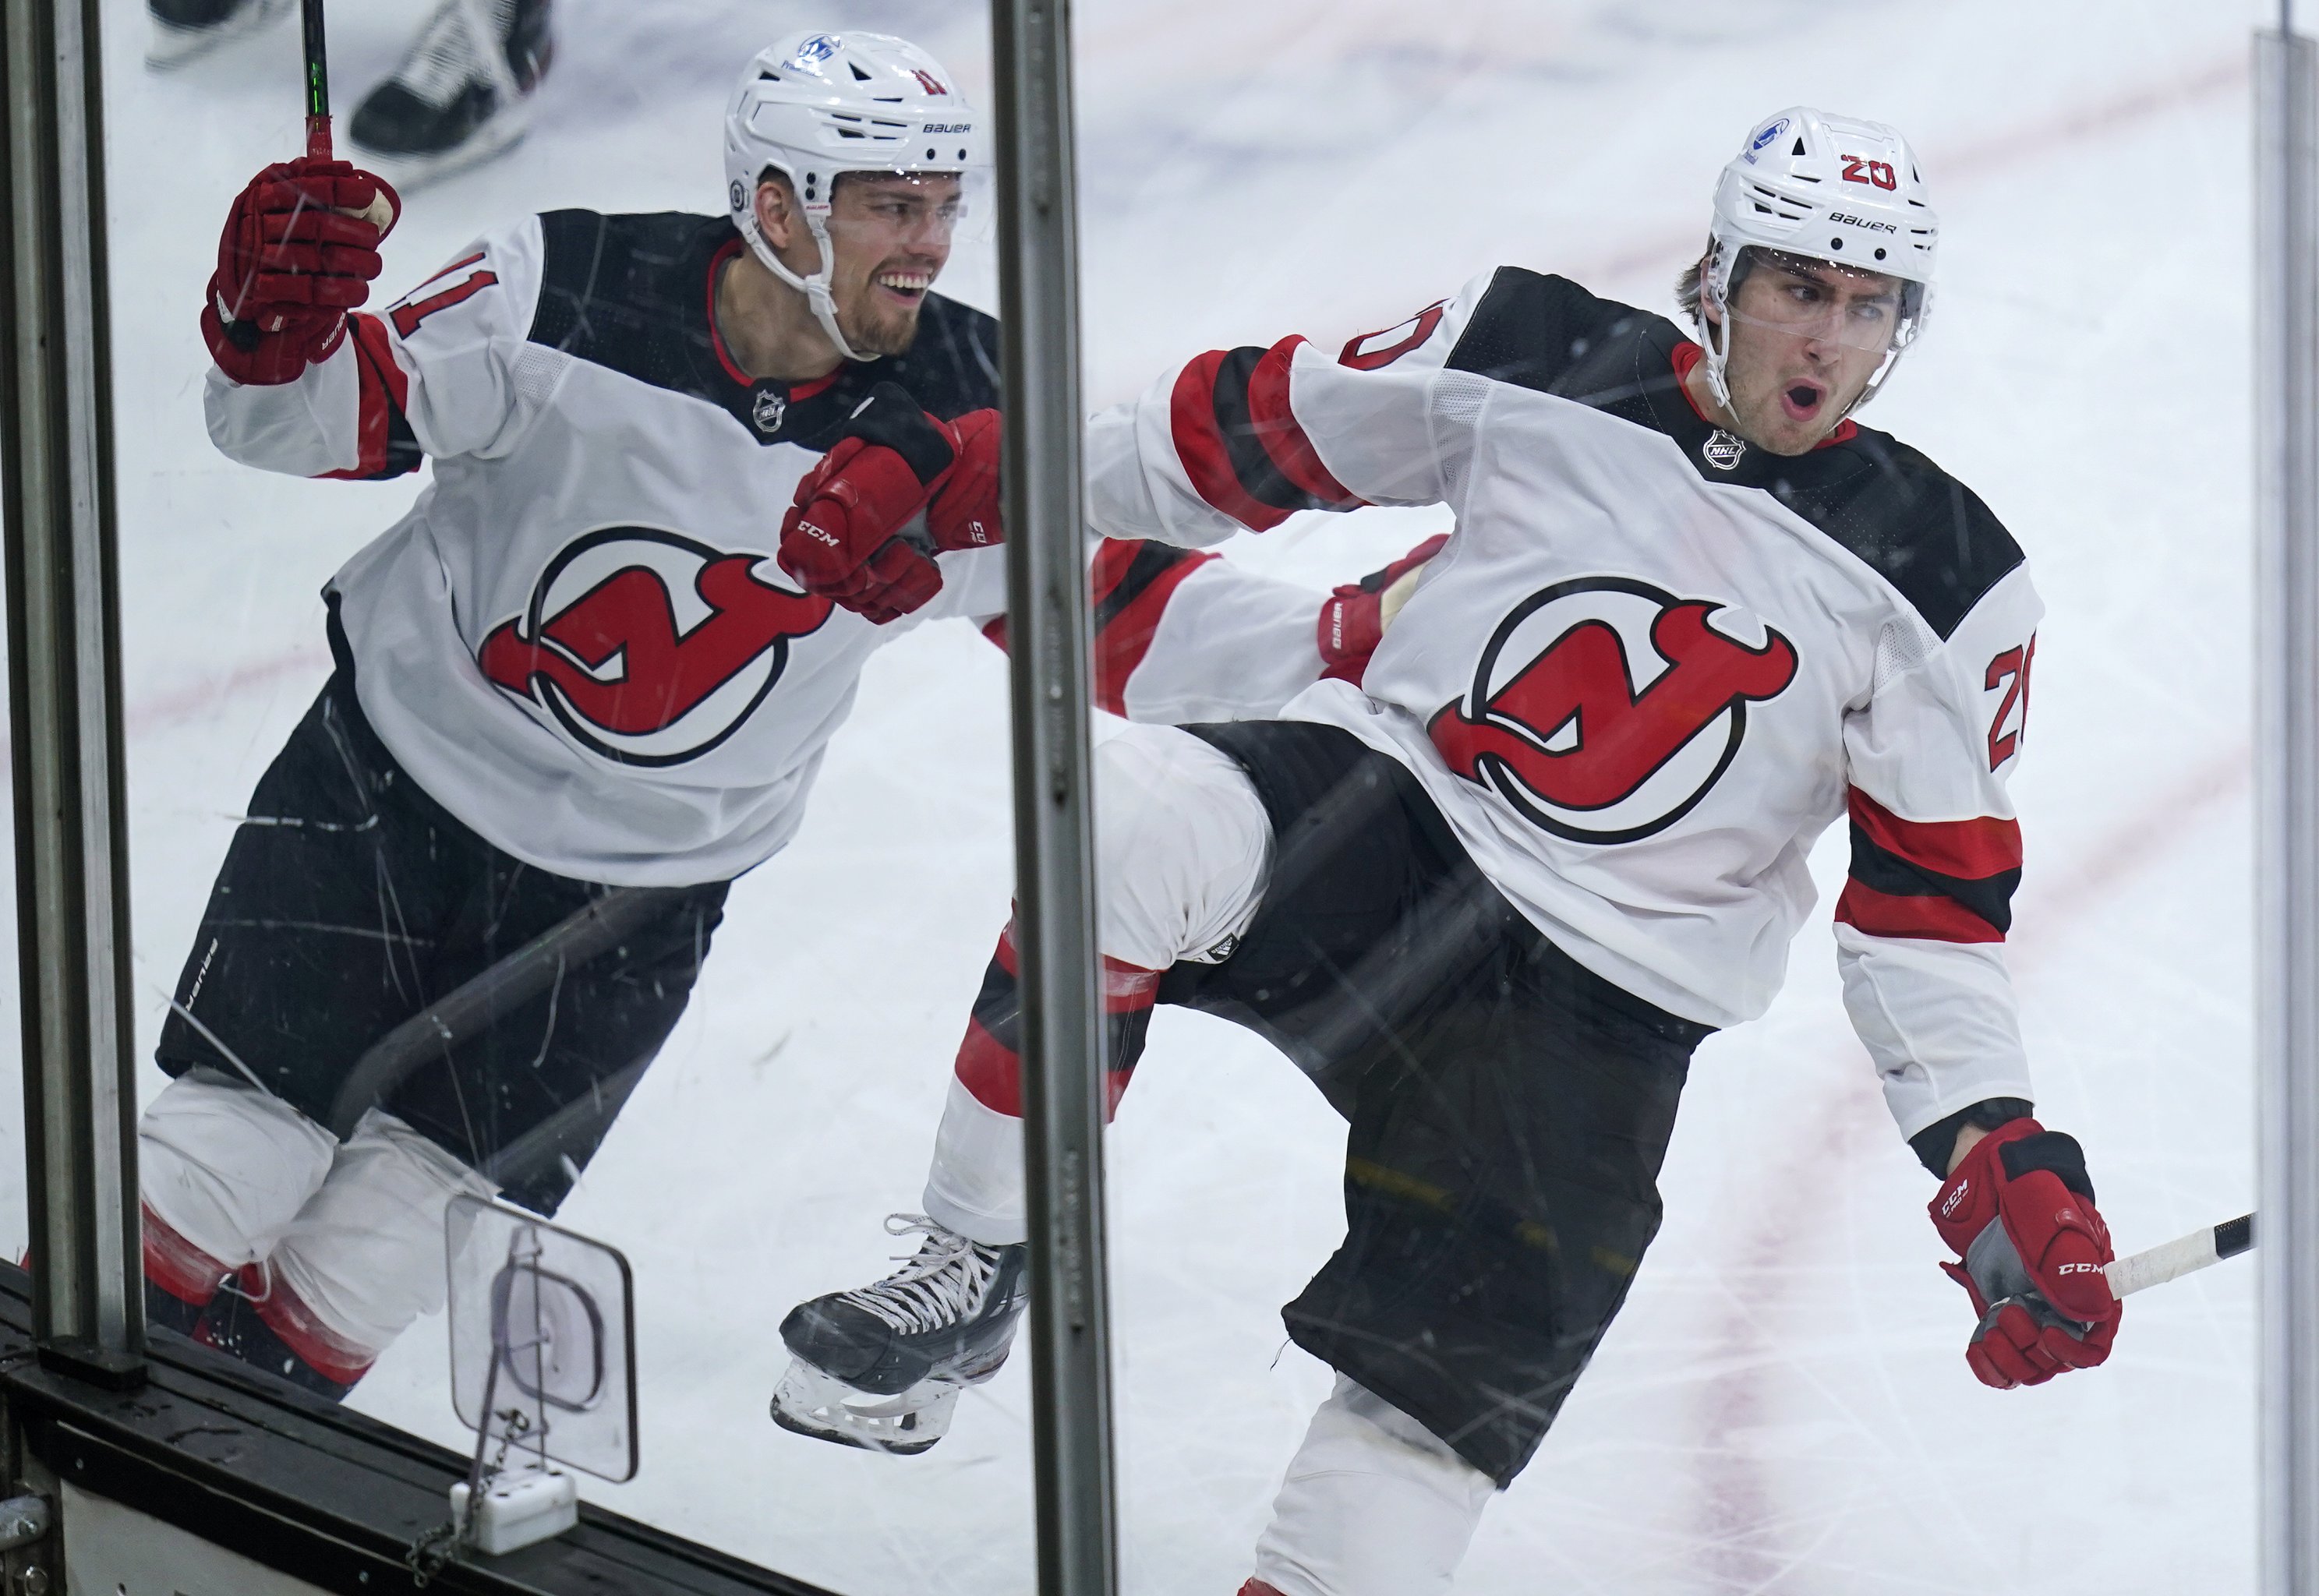 Kyle Palmieri, Devils Agree to New Contract: Latest Details